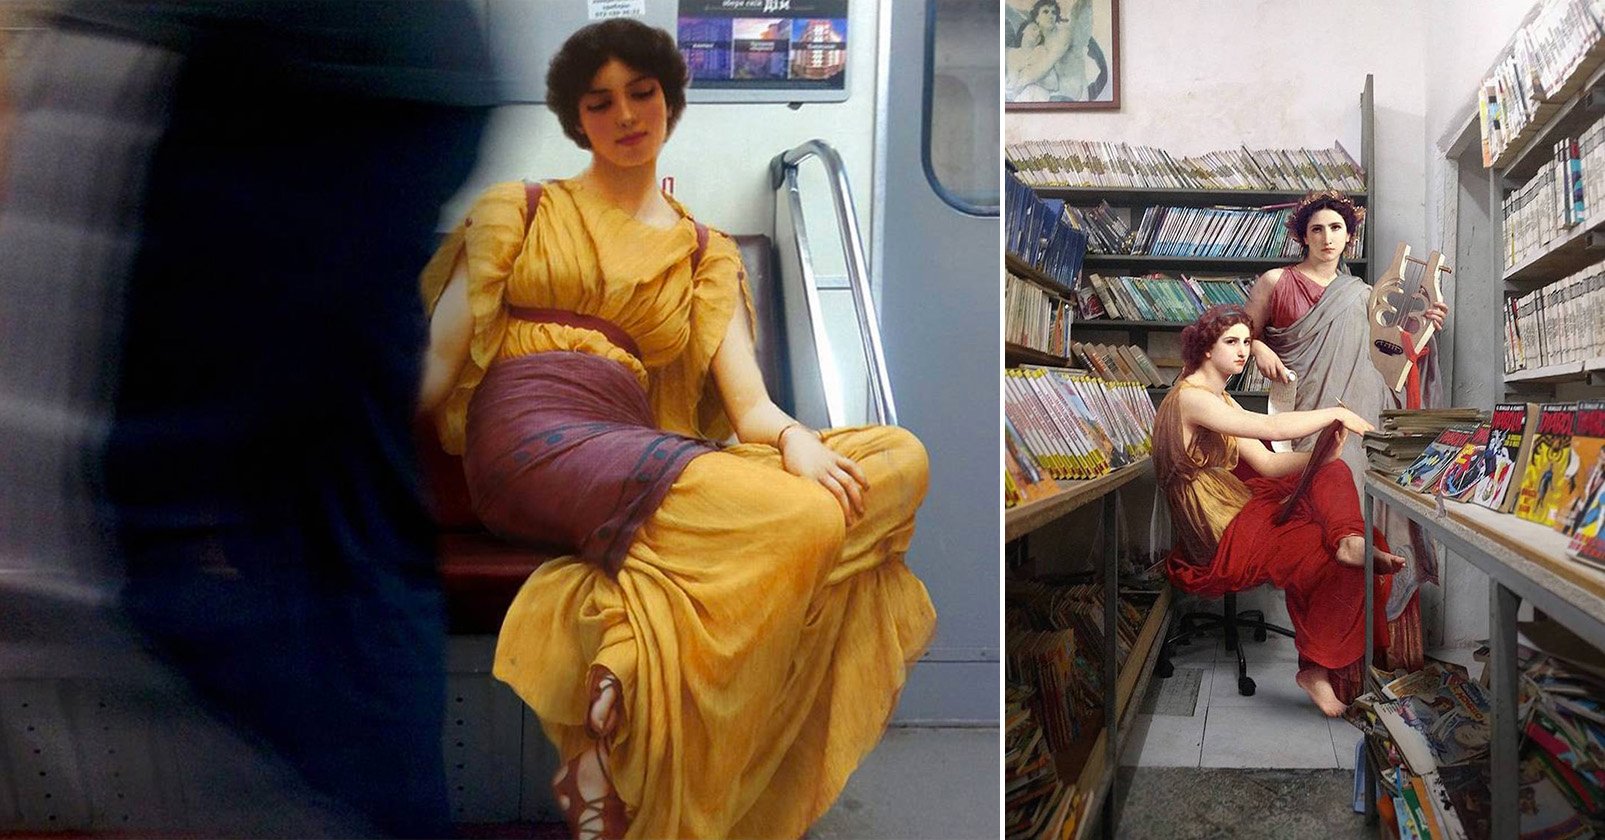 This Artist Photoshops Figures from Classical Paintings Into Modern Photos